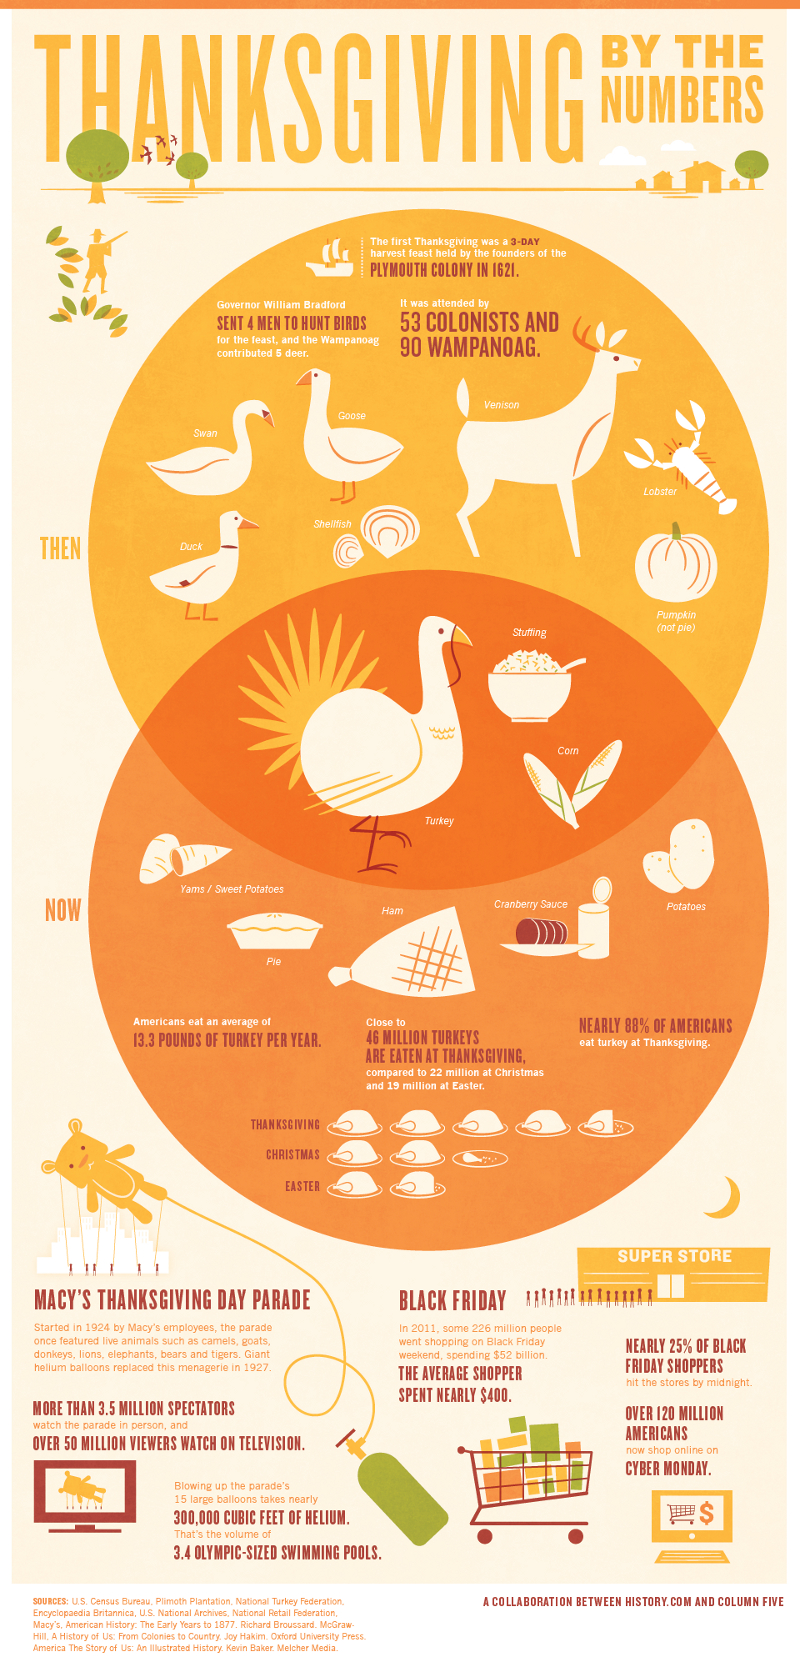 Interesting Facts About Thanksgiving